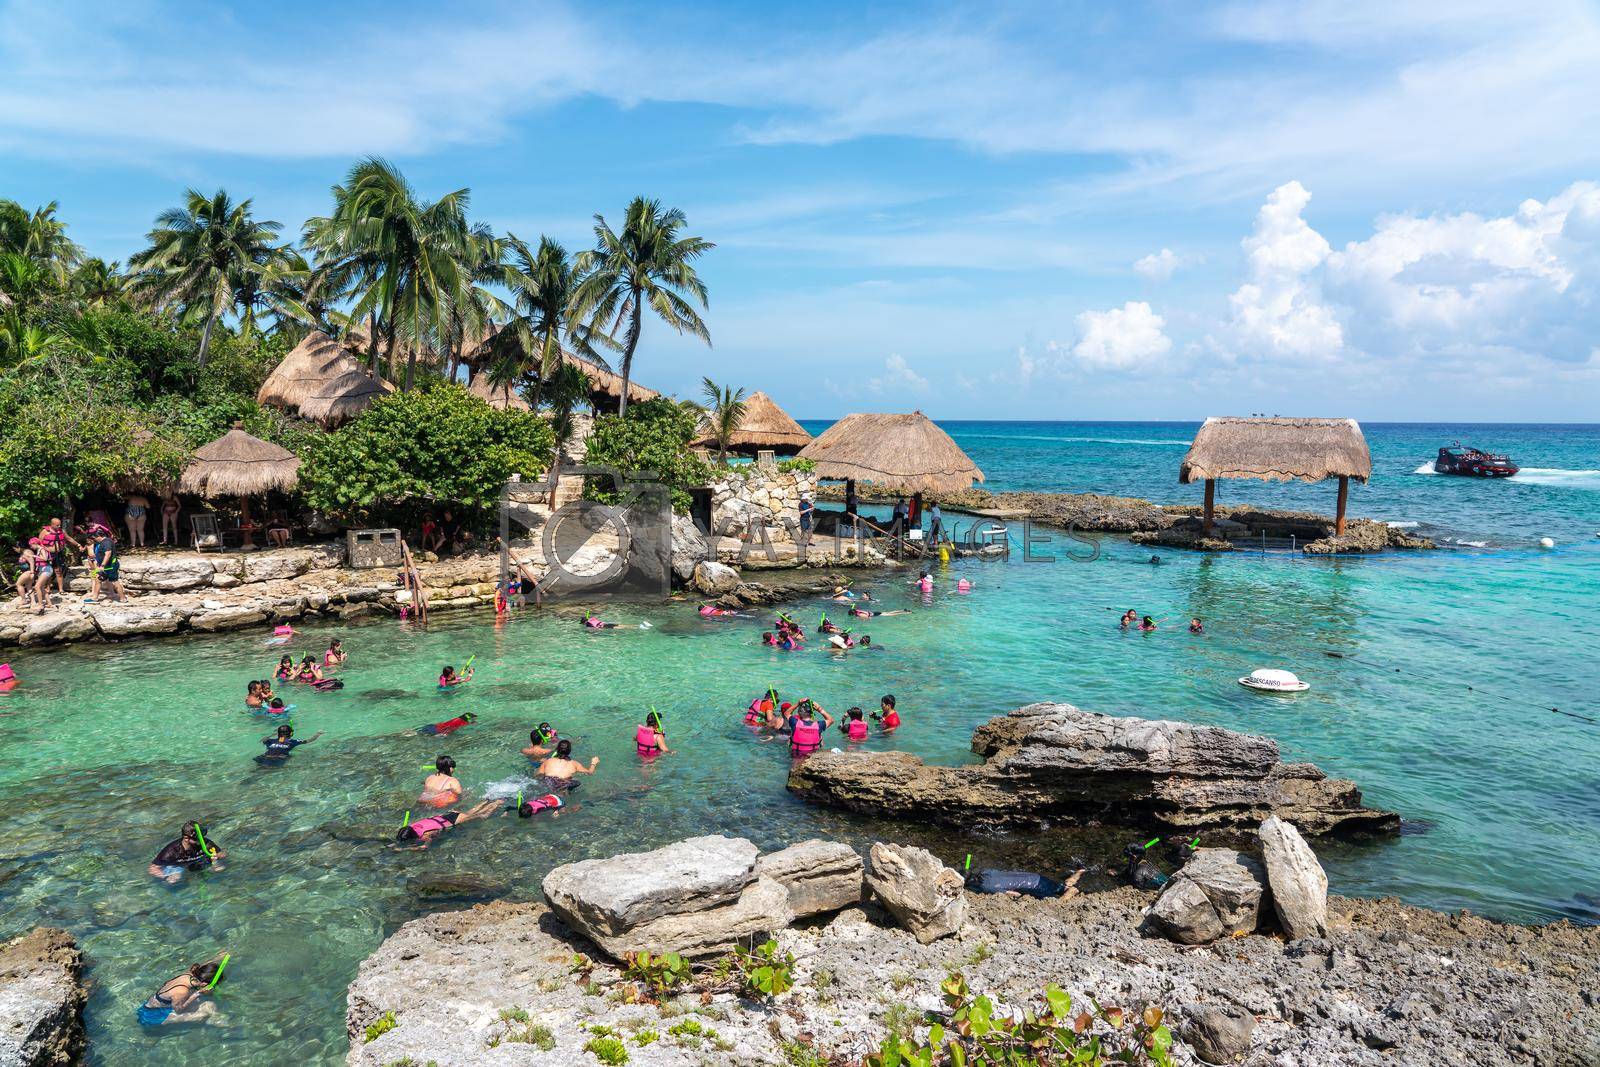 Cancun, Mexico - September 13, 2021: Snorkeling at XCaret park on the Mayan Riviera resort. XCaret is a famous ecotourism park on the mexican Mayan Riviera